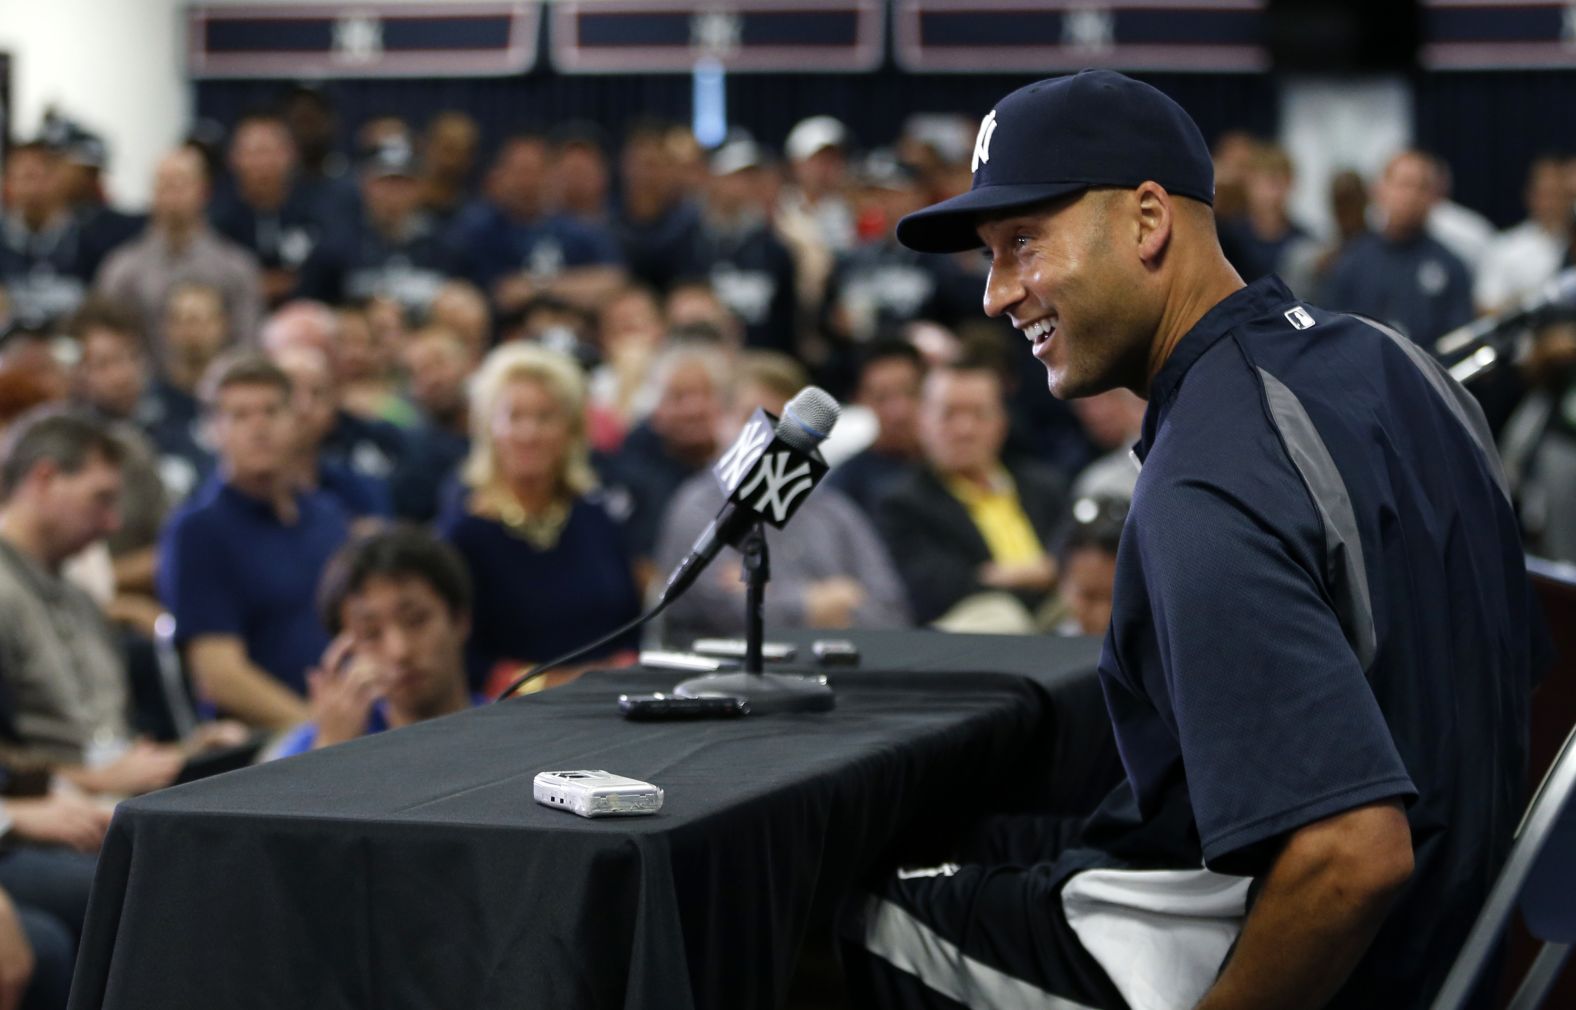 Jeter announces his retirement in February 2014, saying the upcoming season would be his last.